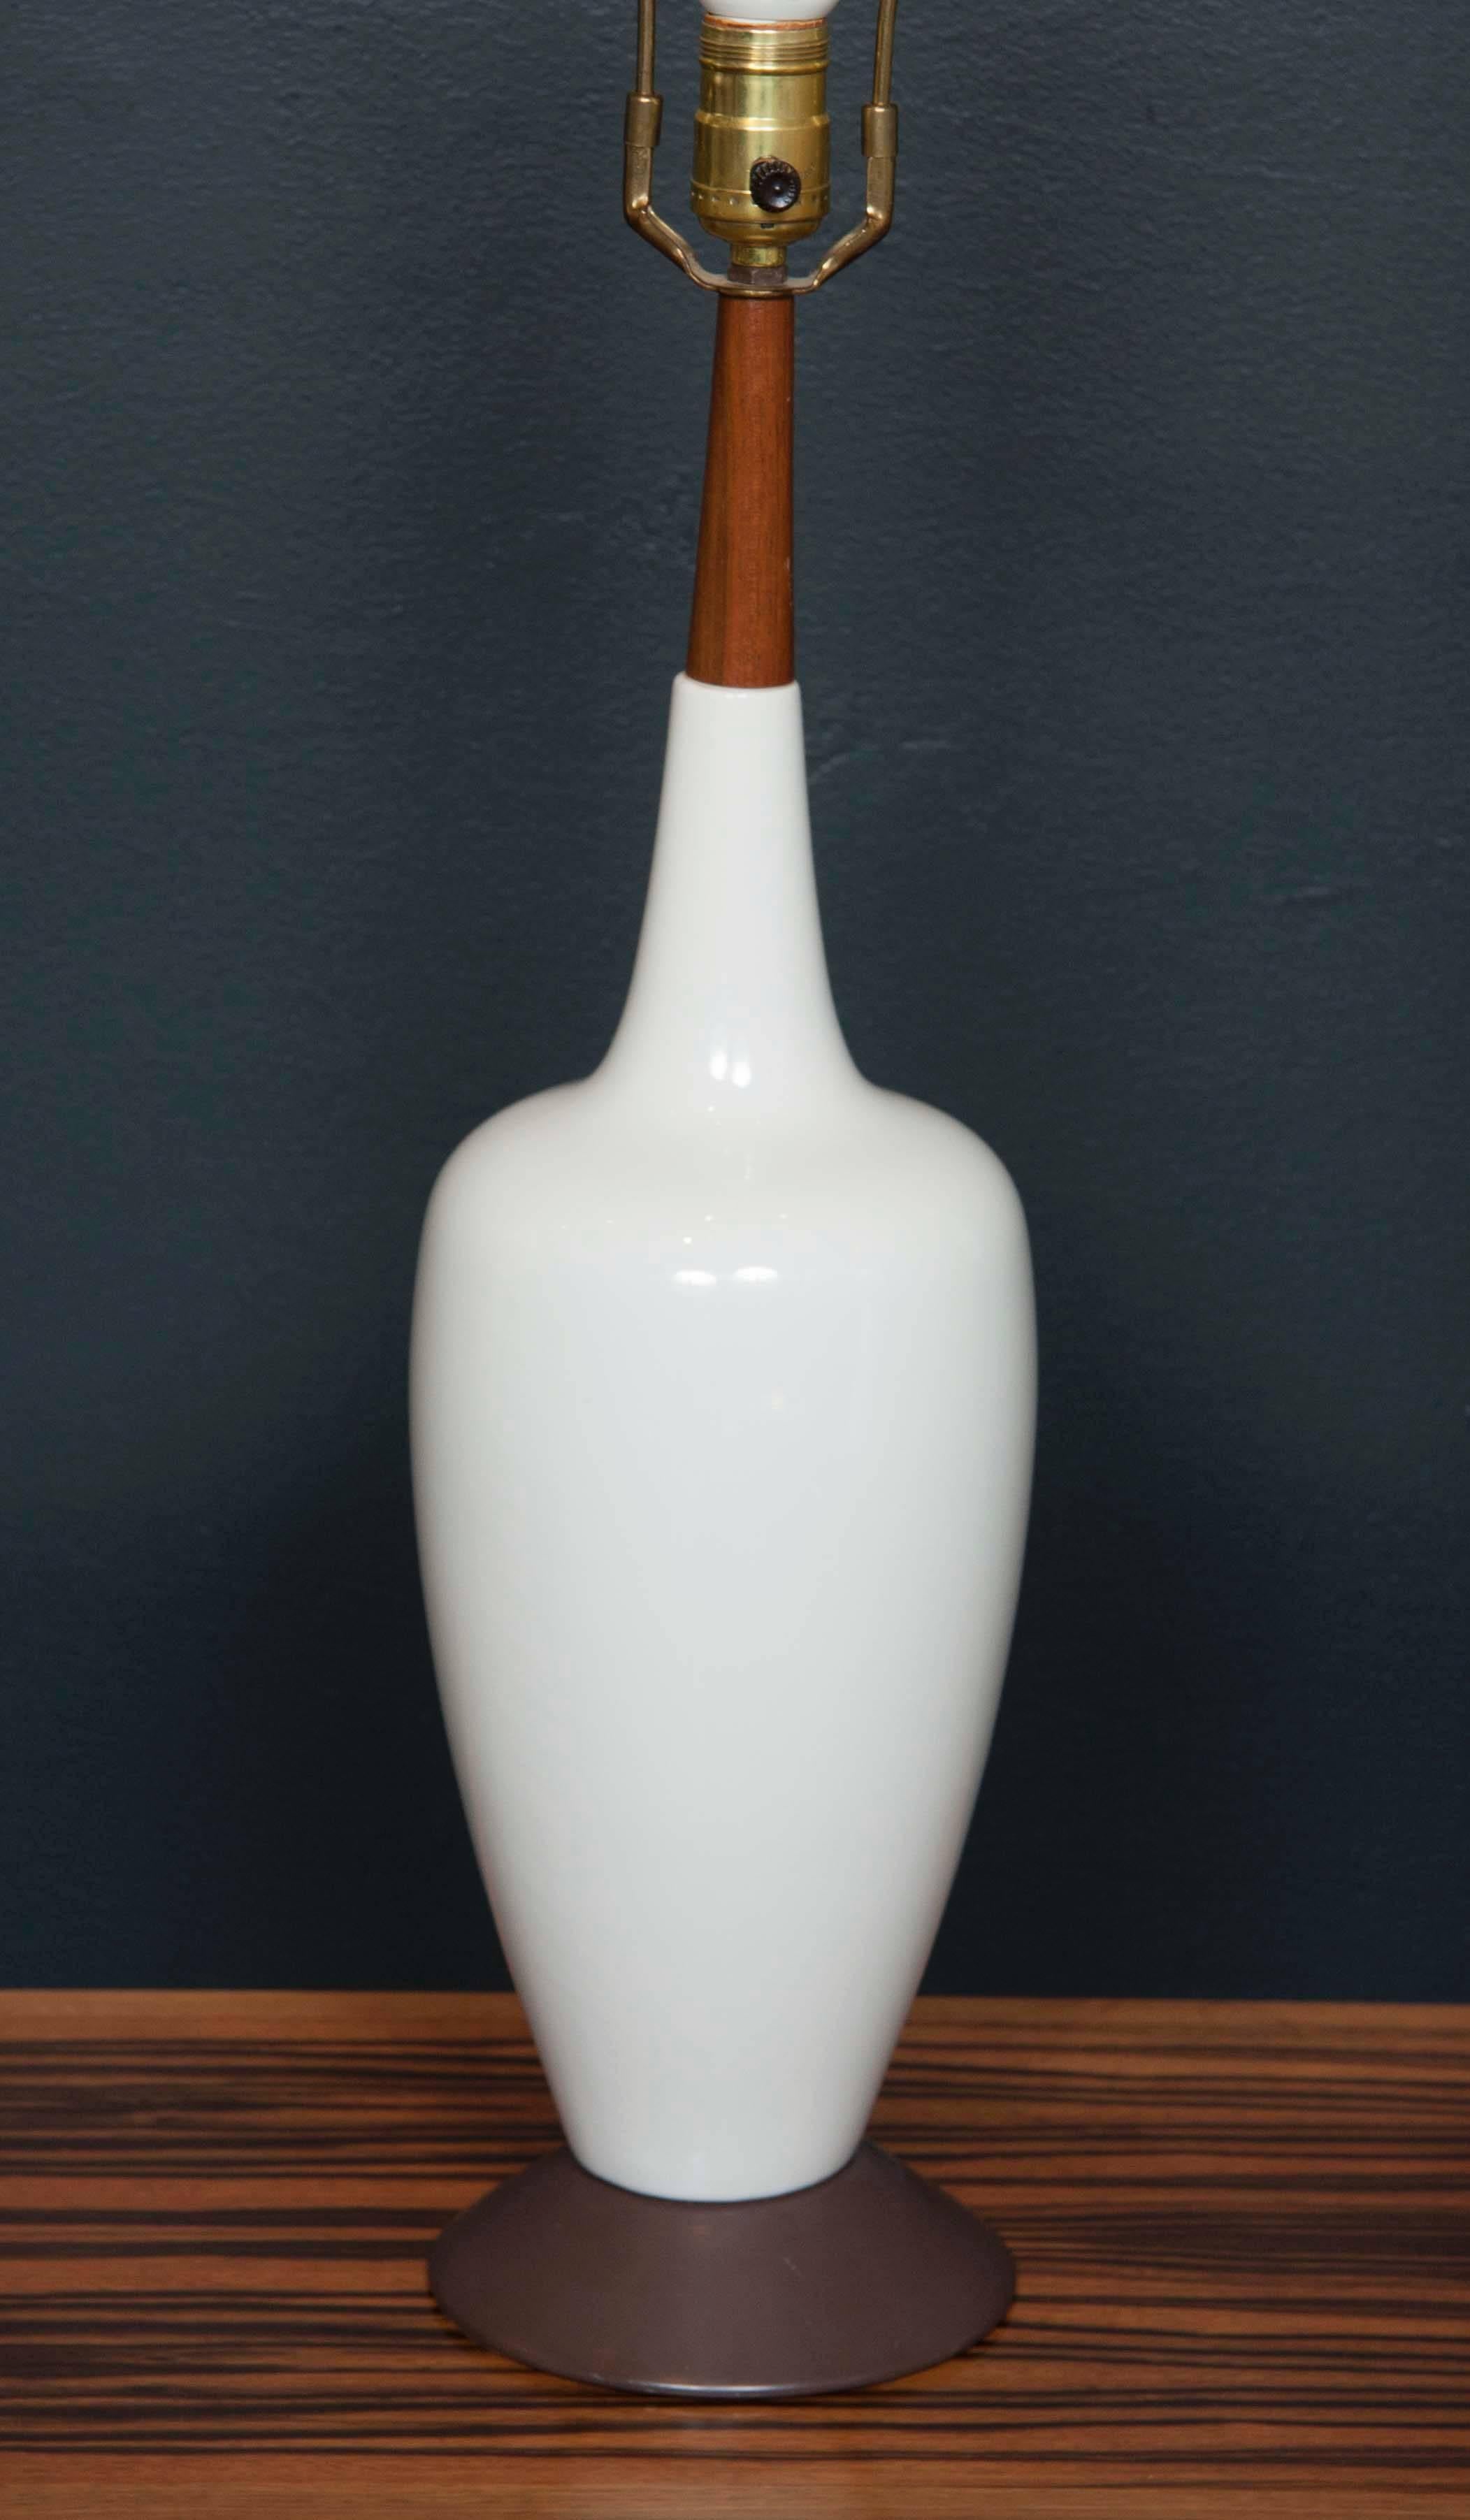 A  Danish Mid-Century table lamp composed of metal base, white ceramic body and slender teak neck.